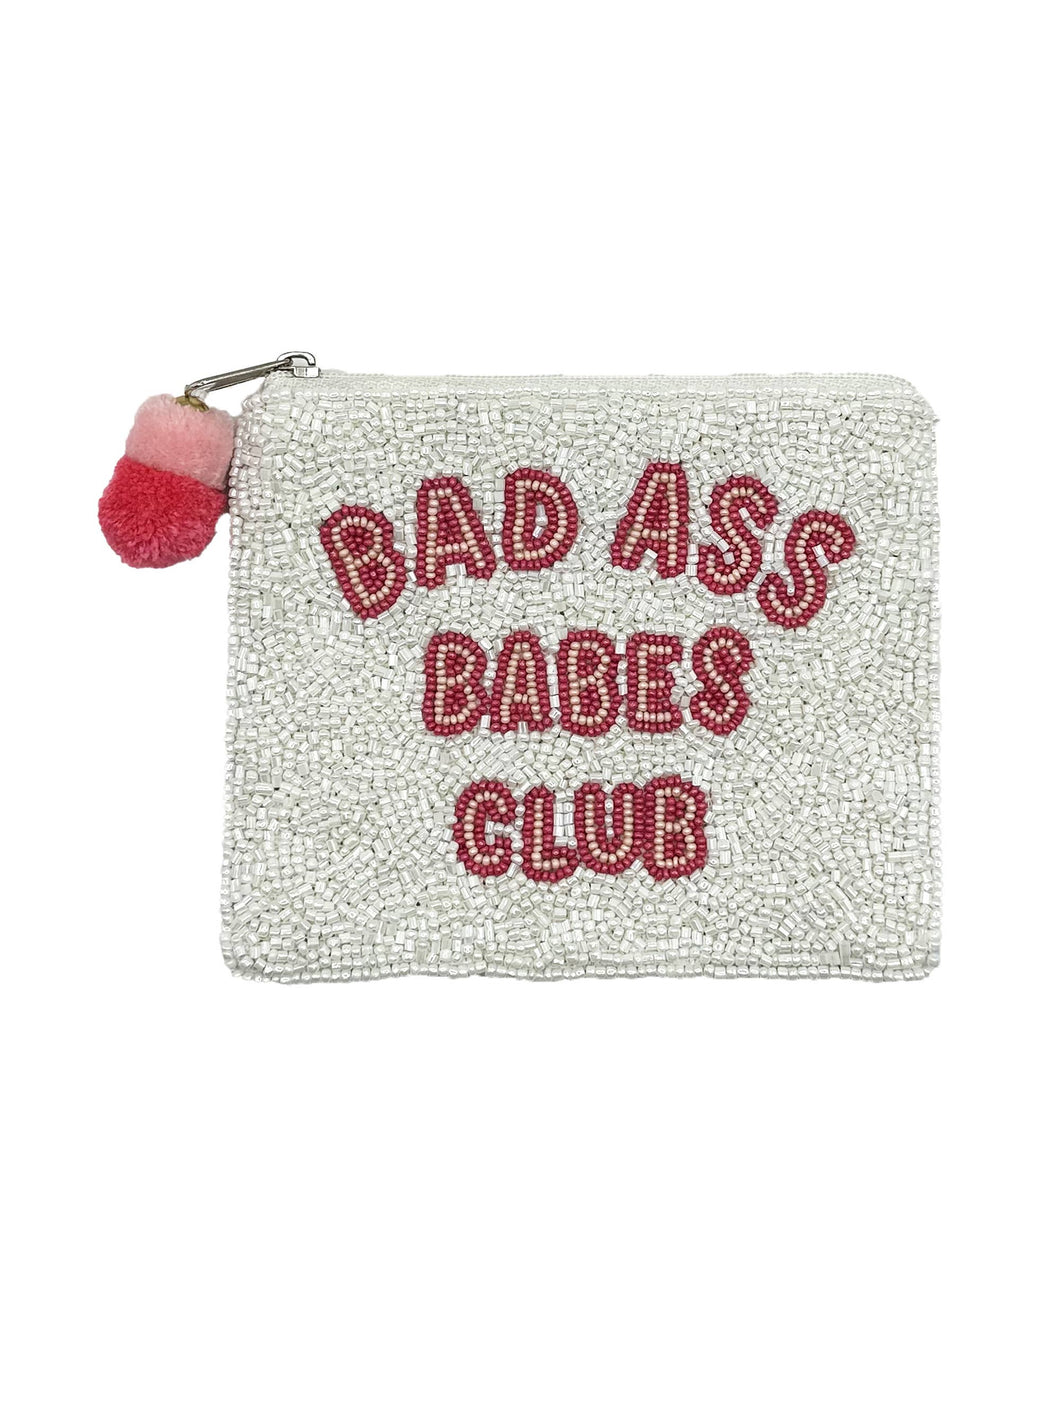 Bad Ass Babes Club Beaded Wallet